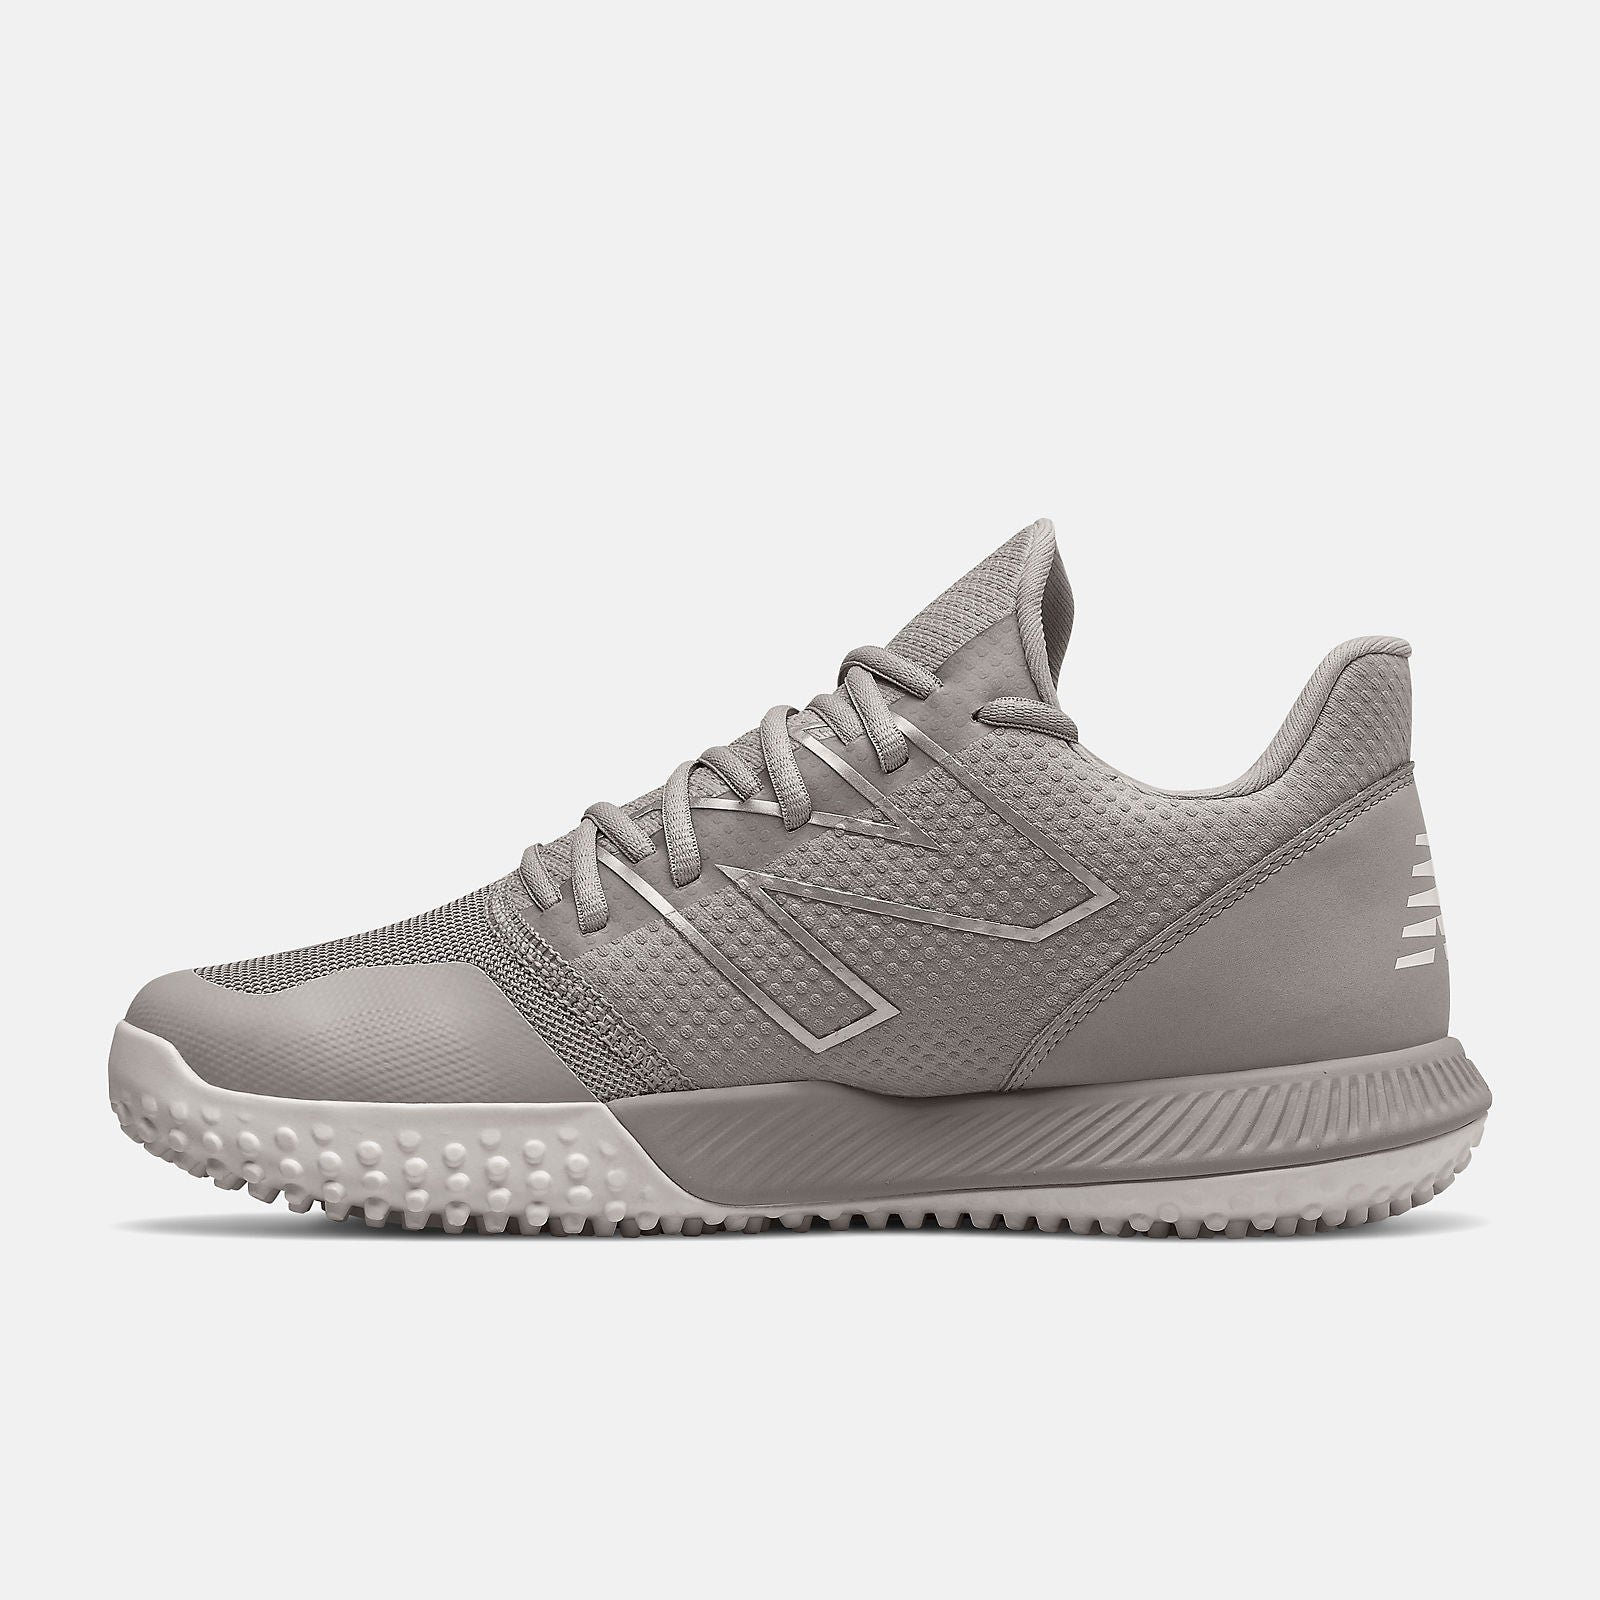 New Balance Turf Shoe - Grey FuelCell 4040v6 (T4040TG6)